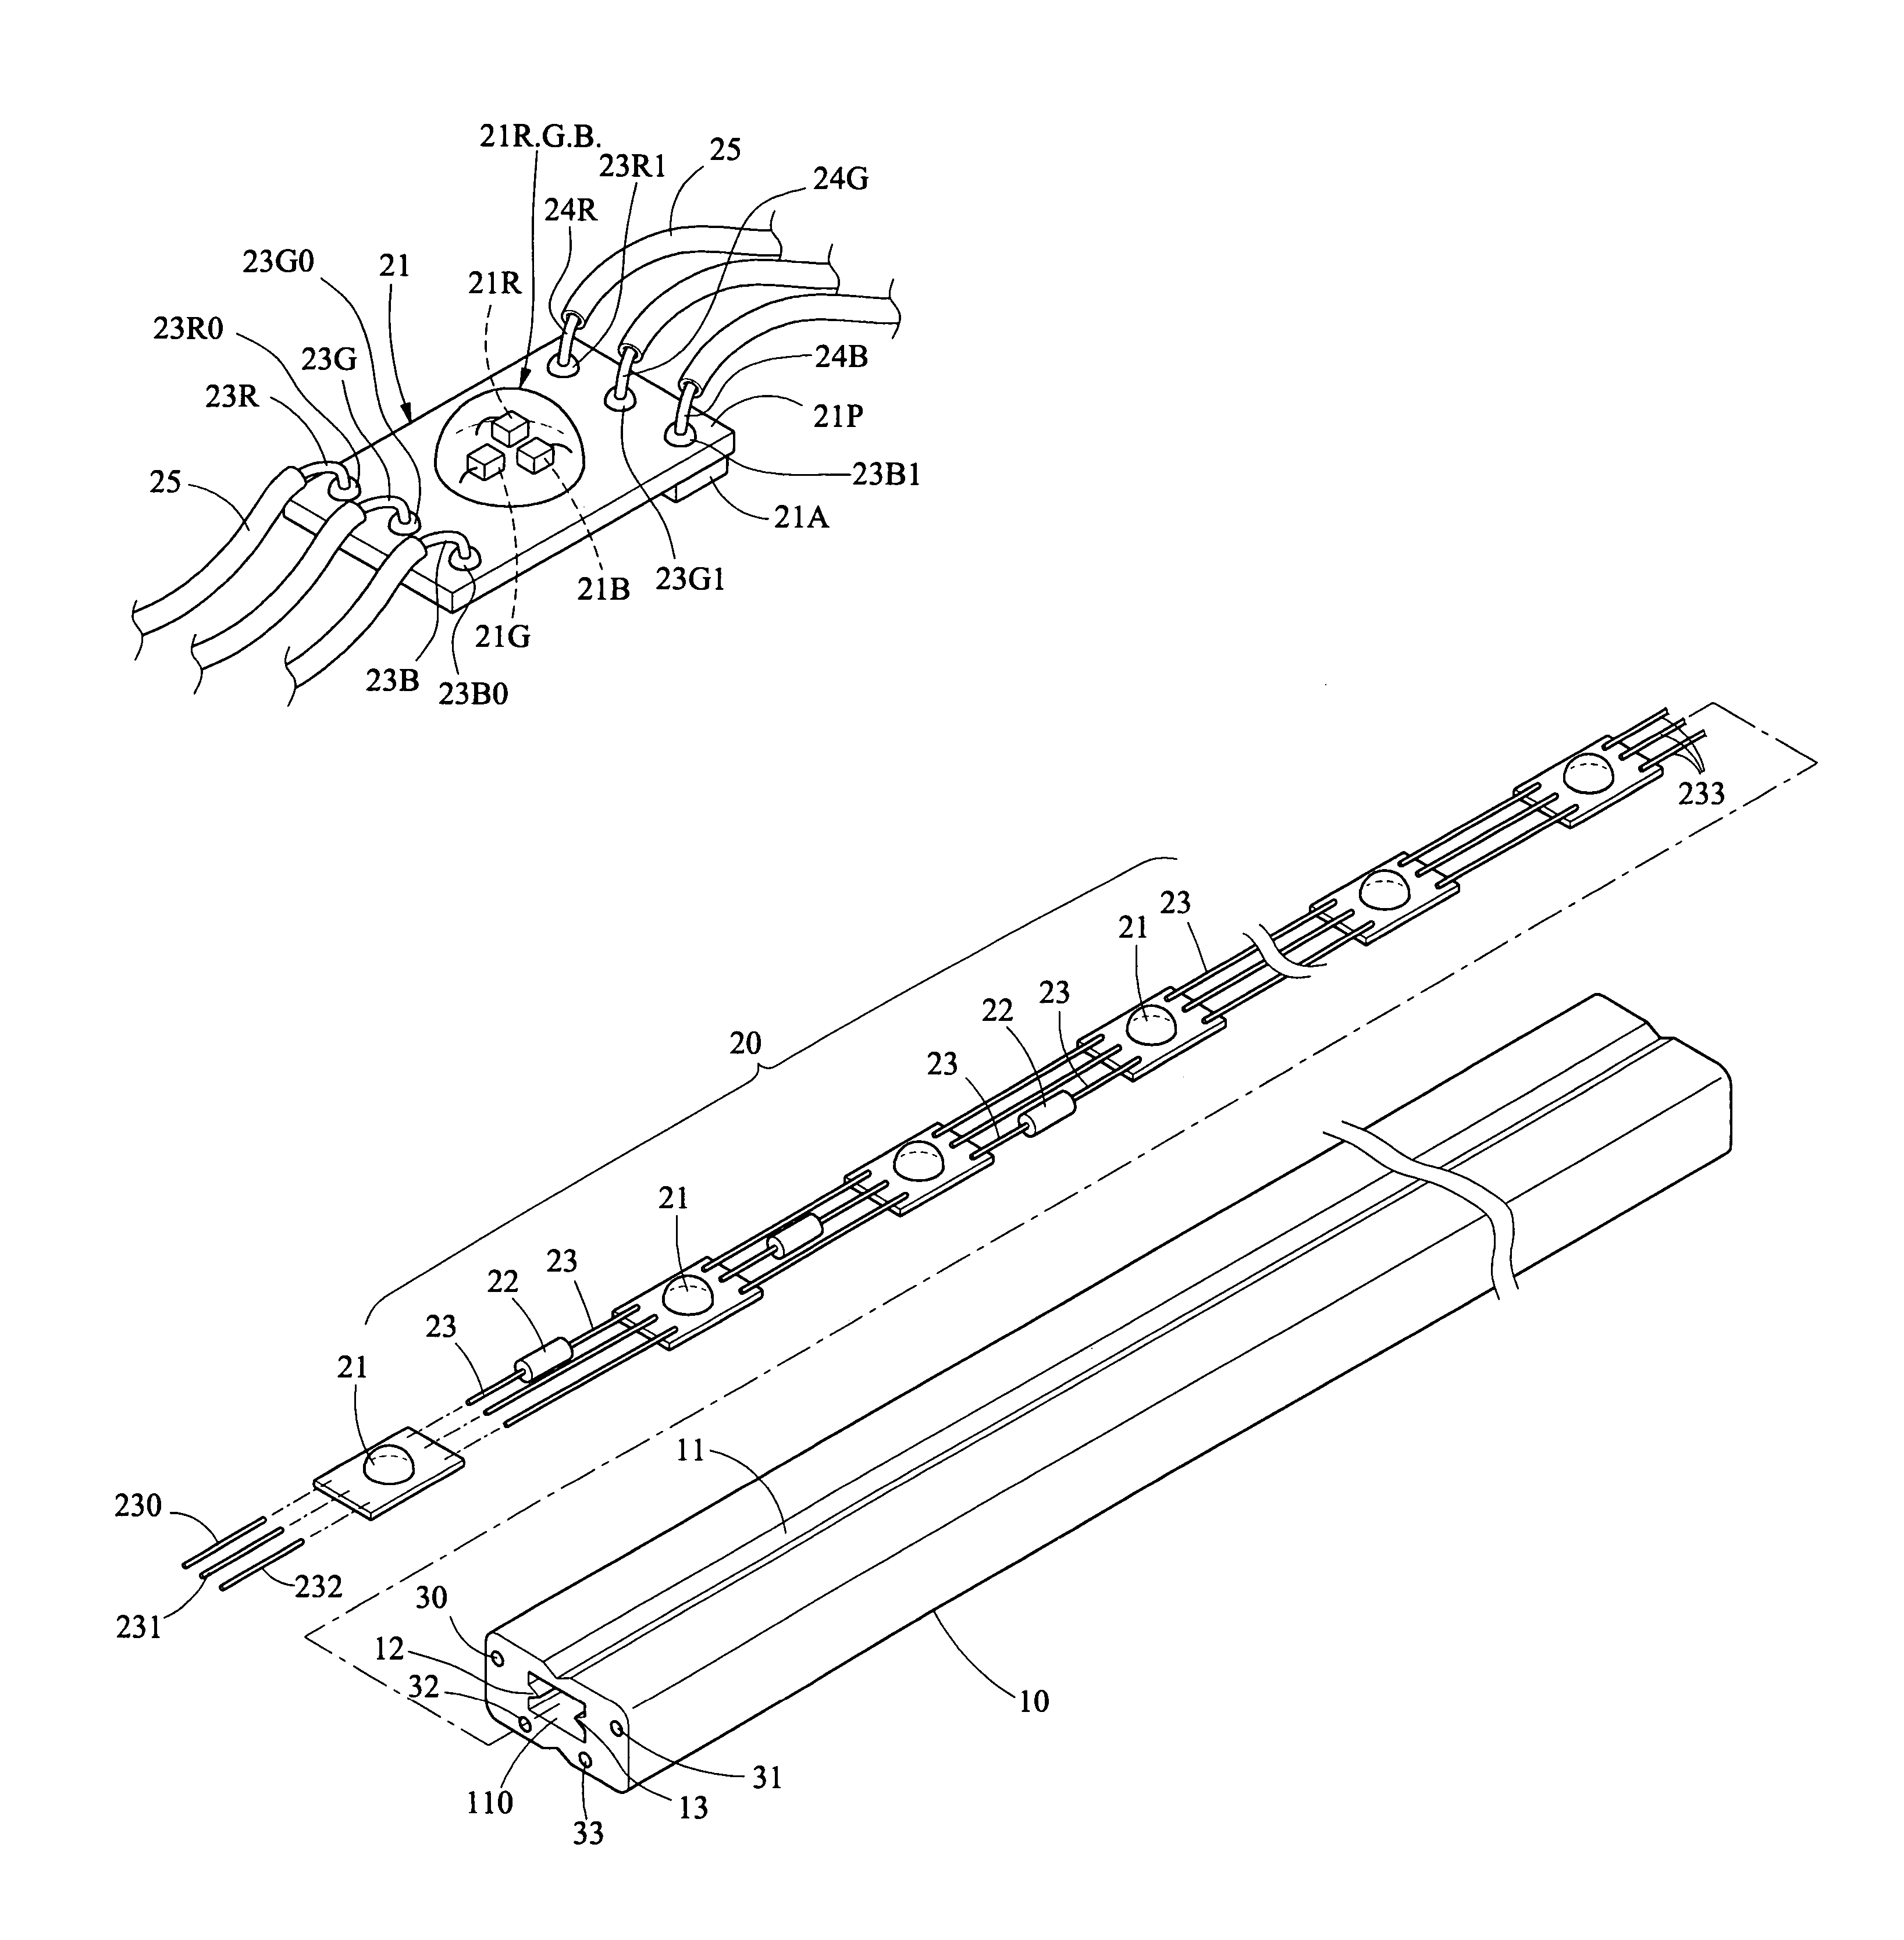 Full-color flexible light source device